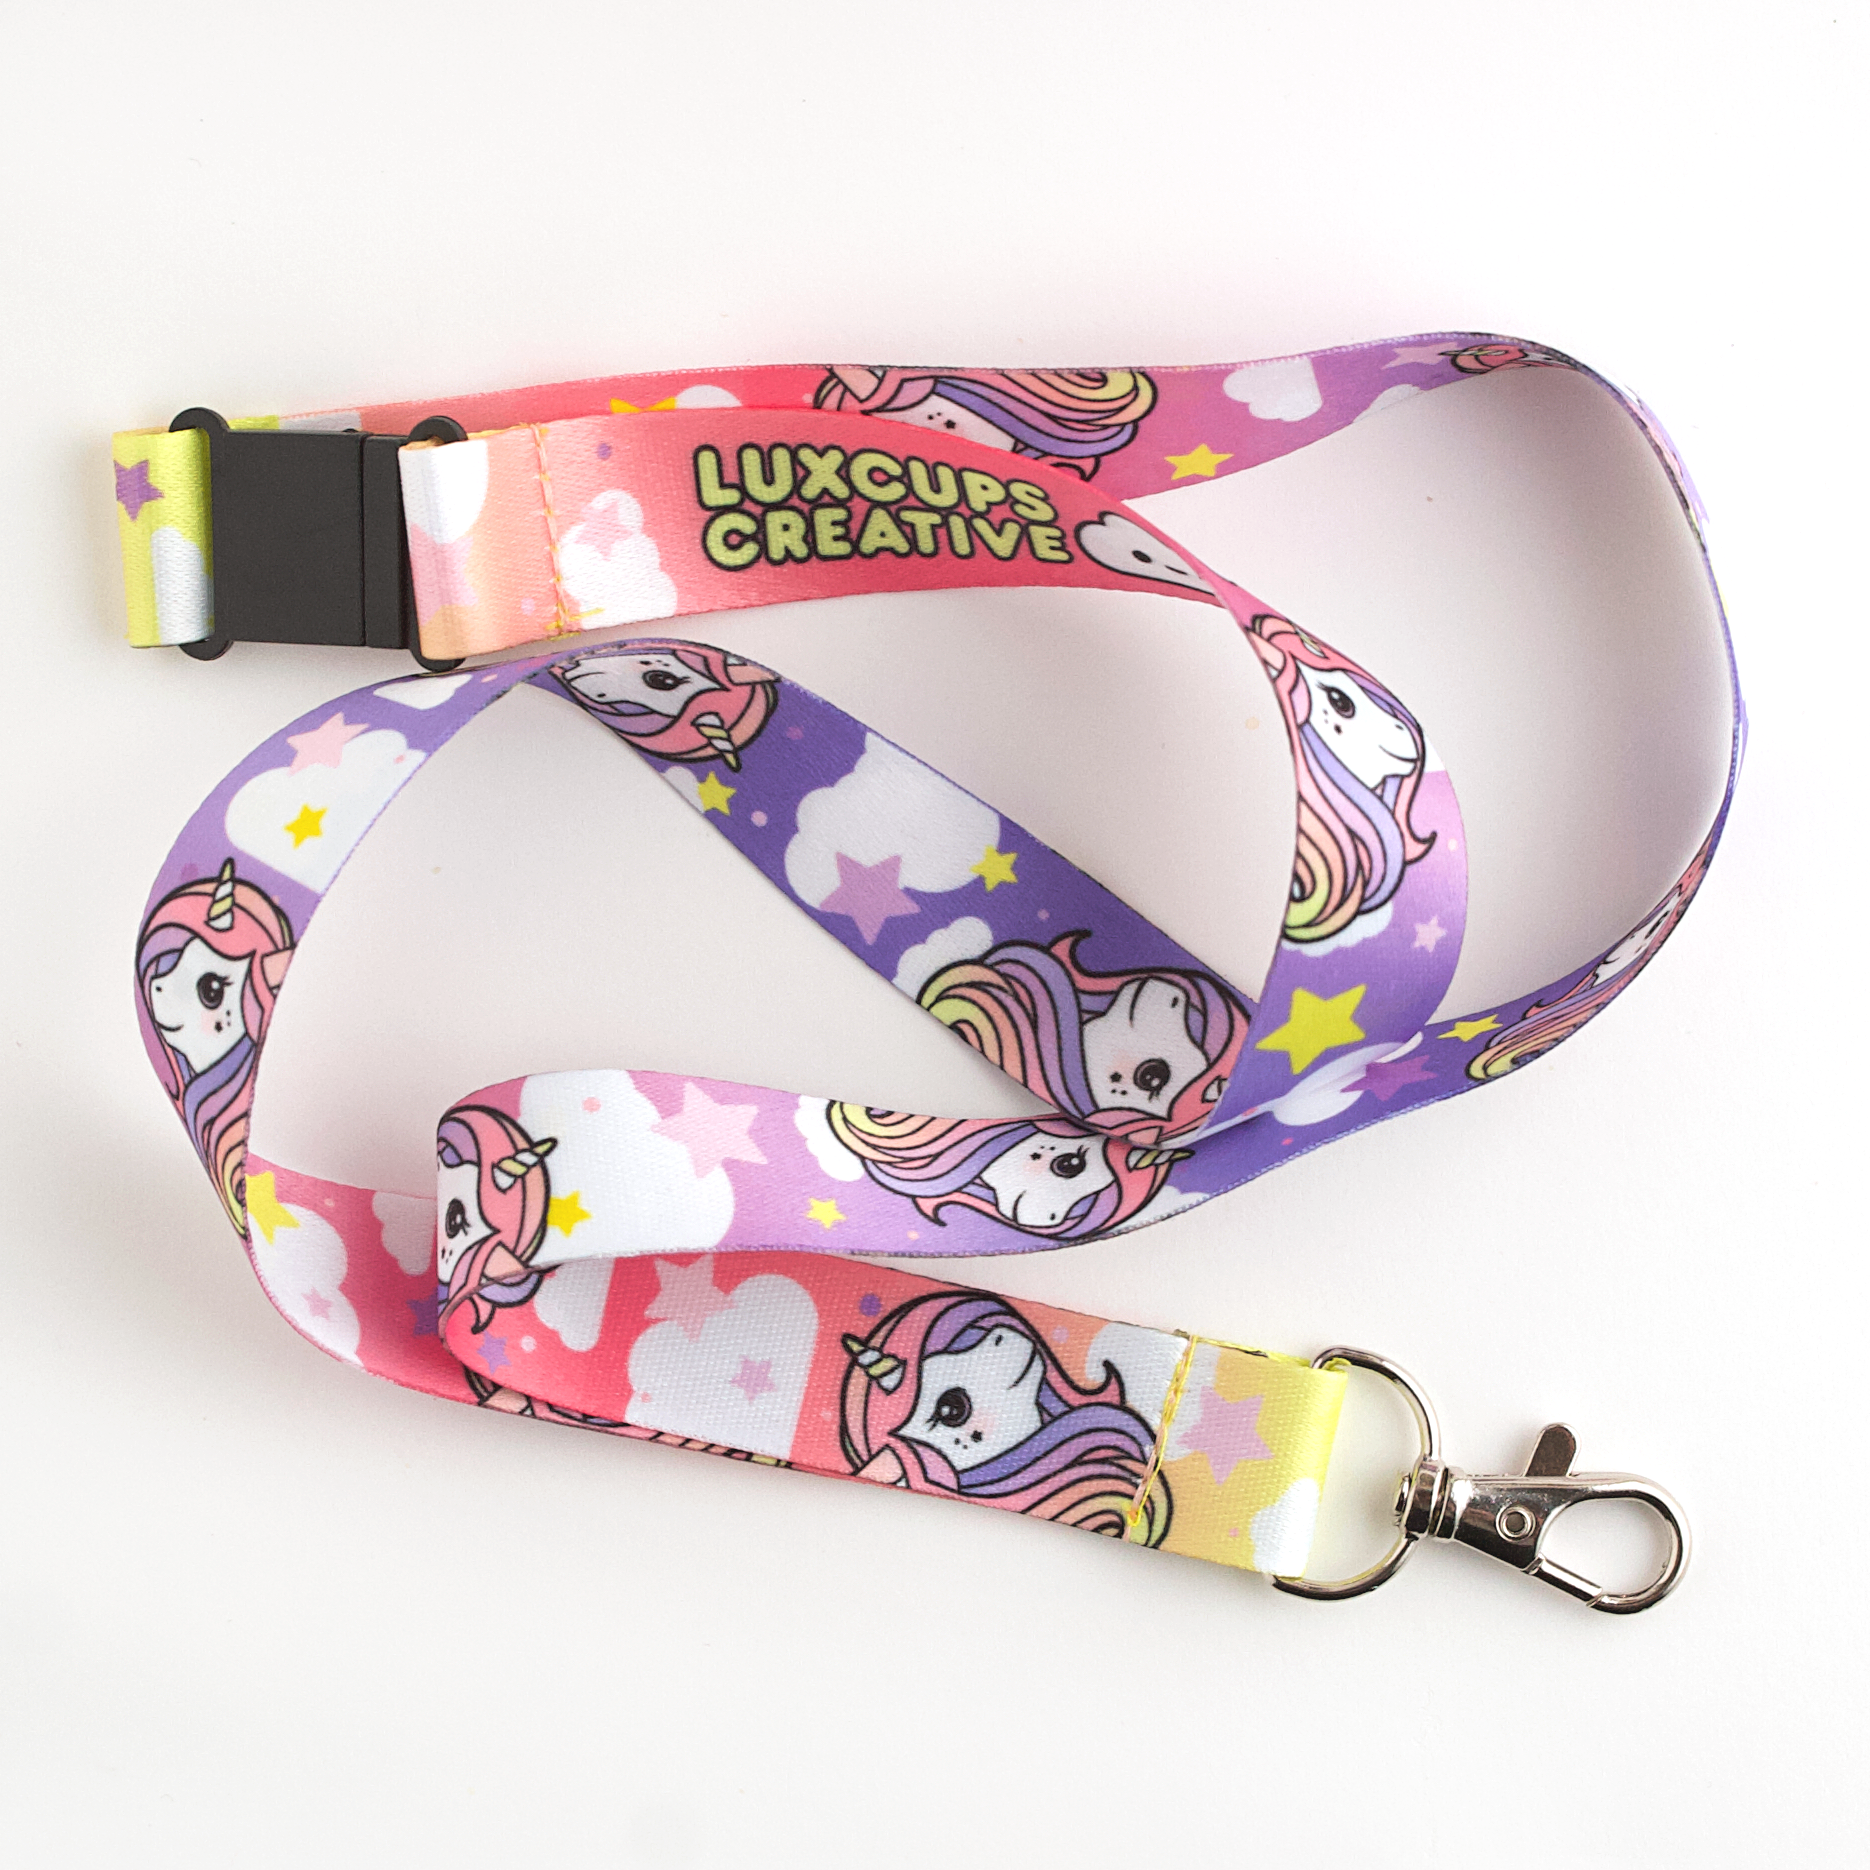 Details about   LUXCUPS CREATIVE ALPACASUS LANYARD 